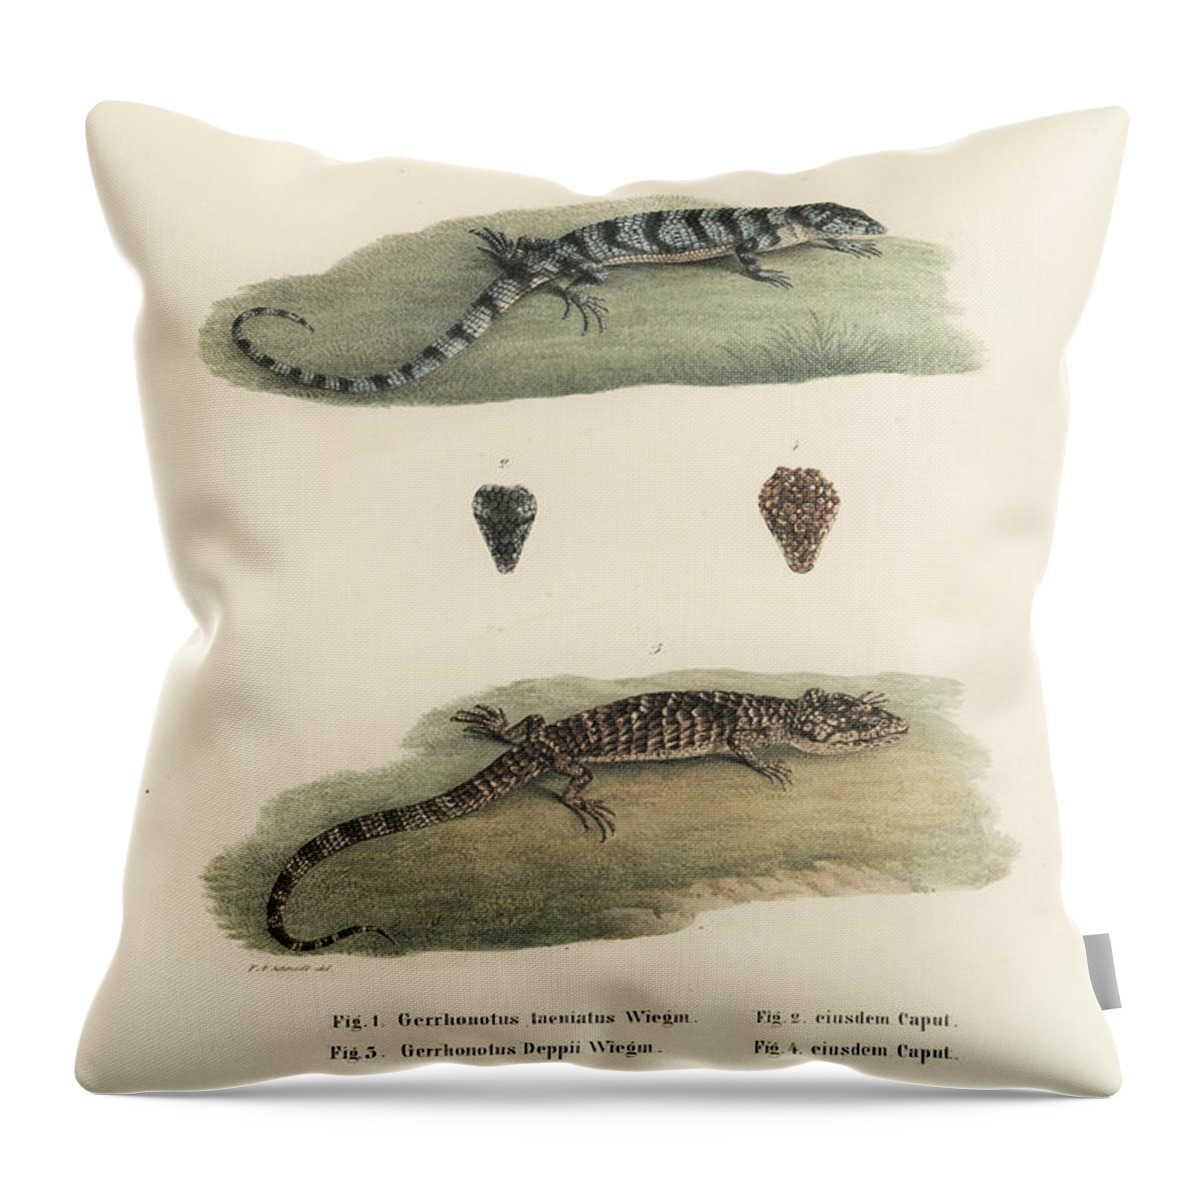 Deppes Arboreal Alligator Lizard Throw Pillow featuring the drawing Alligator Lizards by Friedrich August Schmidt